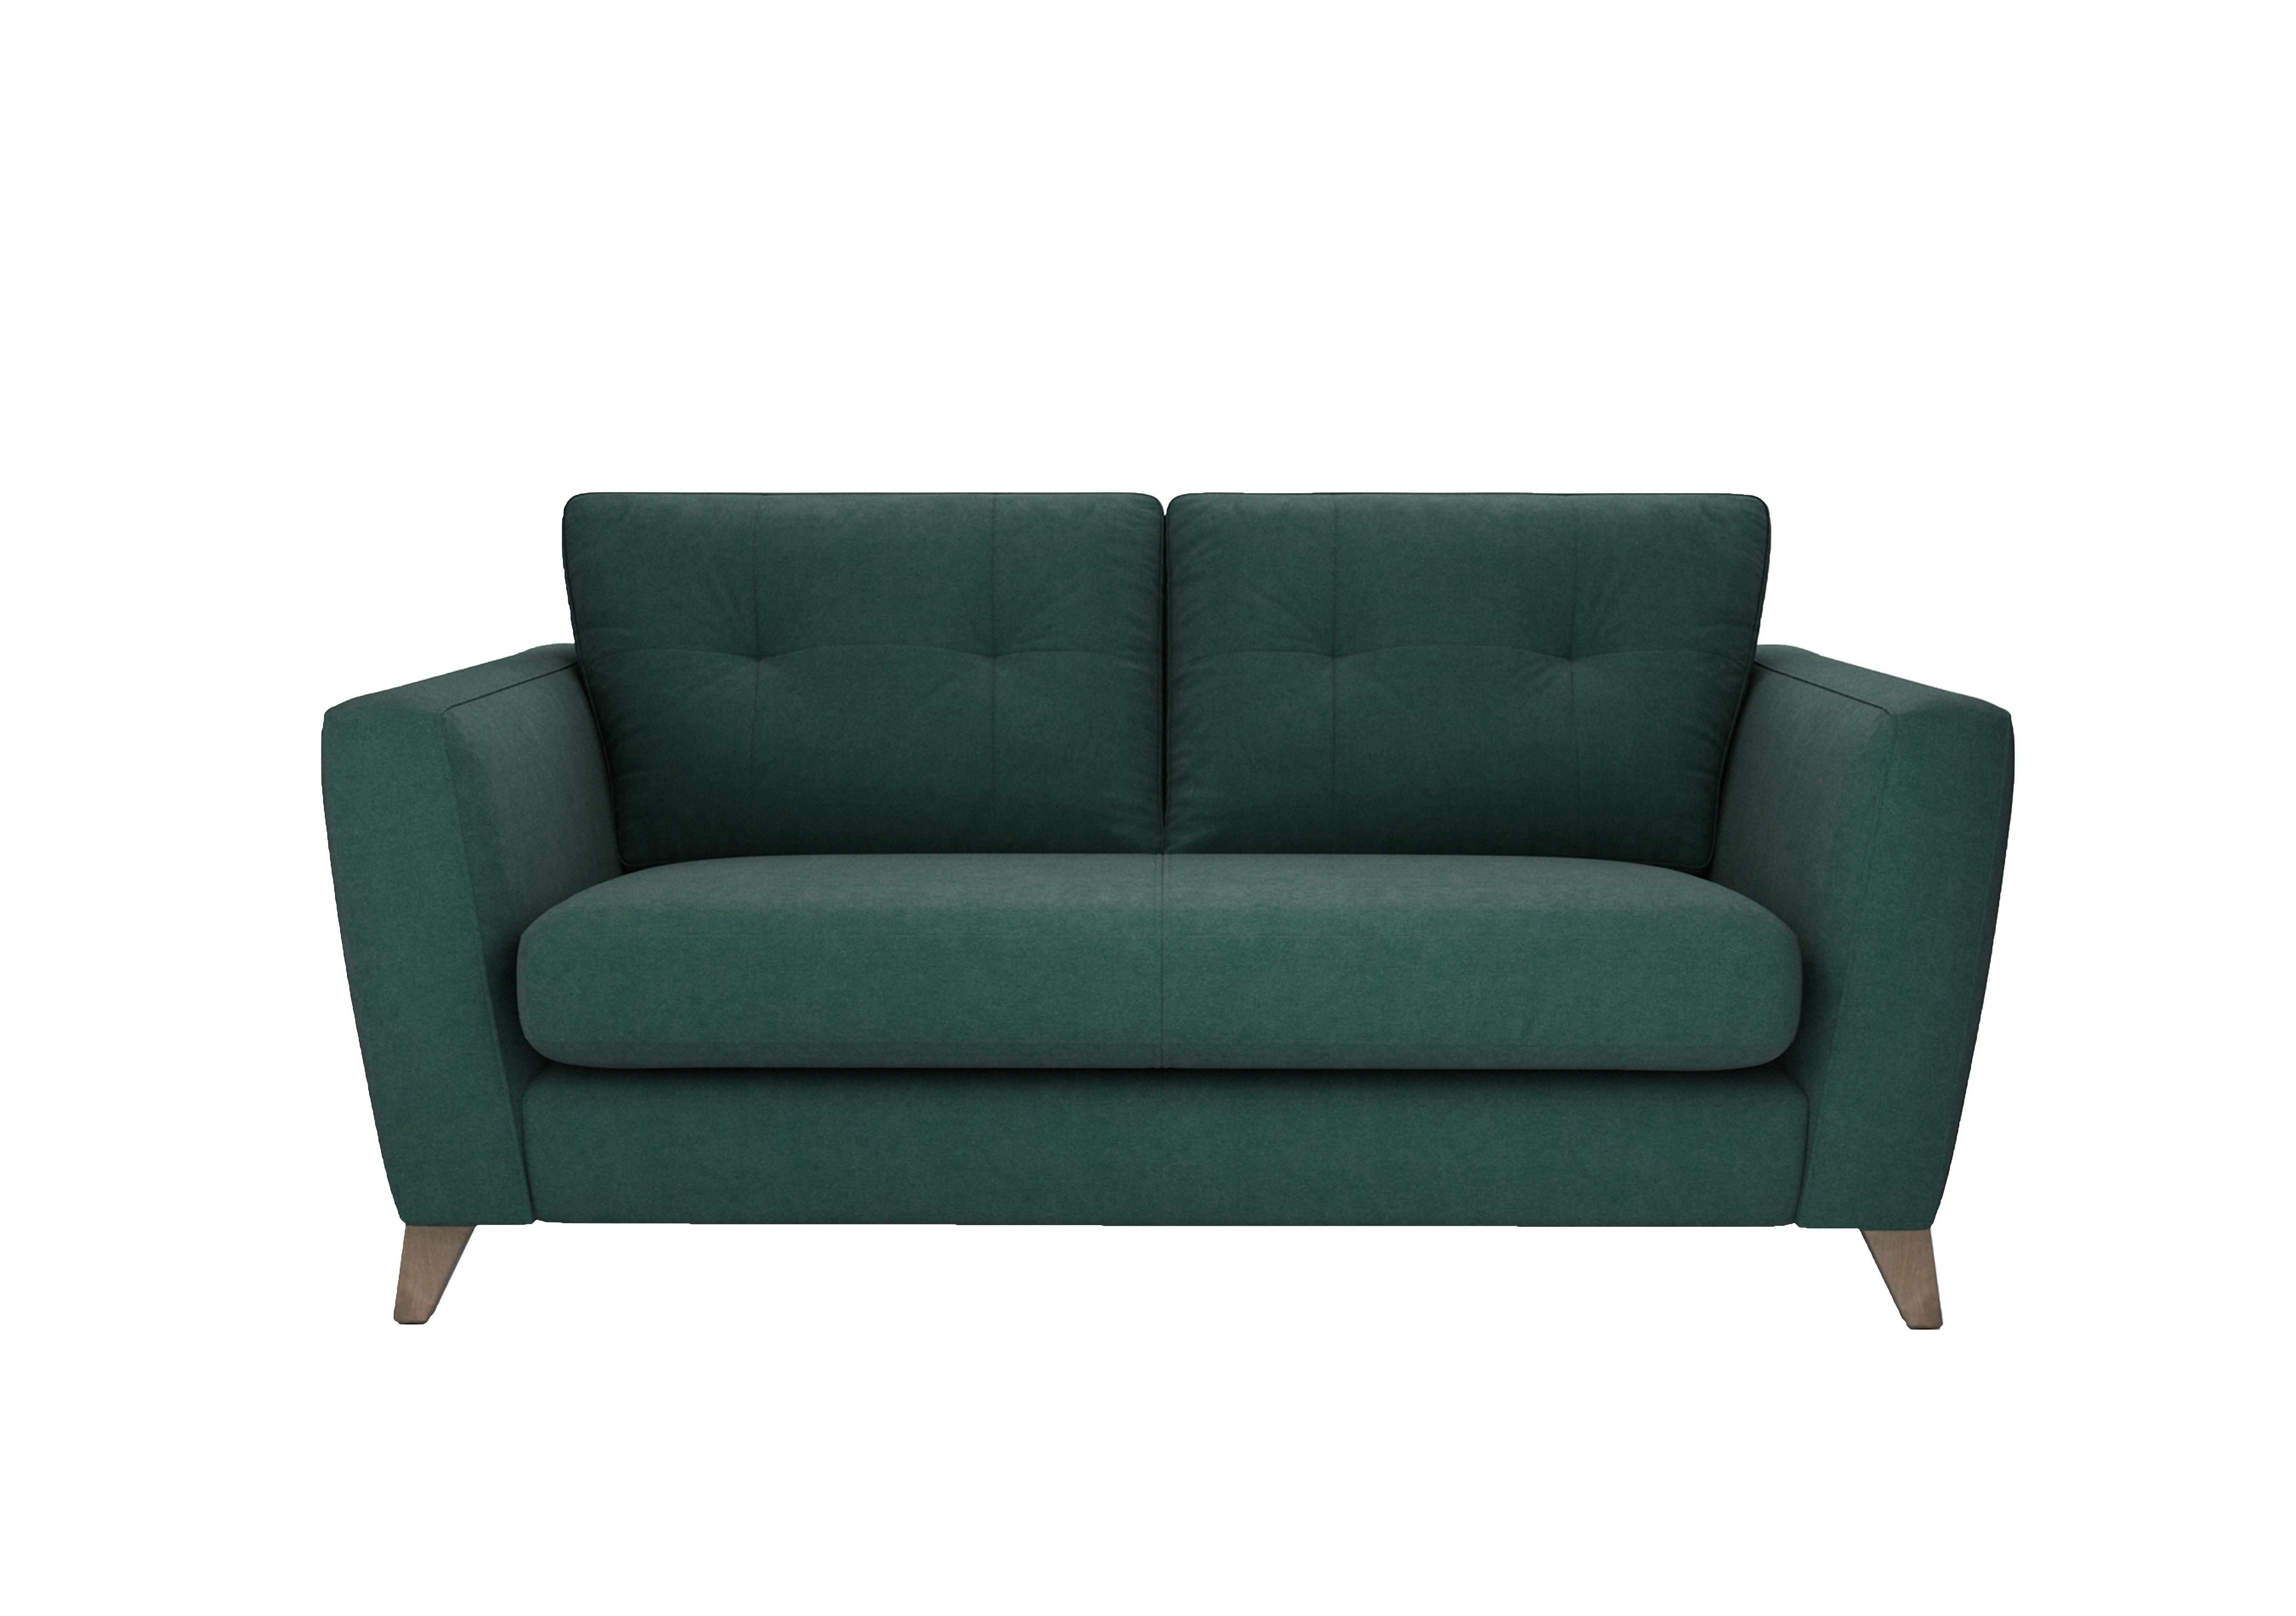 Hermione 2.5 Seater Fabric Sofa in Cur226 Curly Kale Wo Ft on Furniture Village